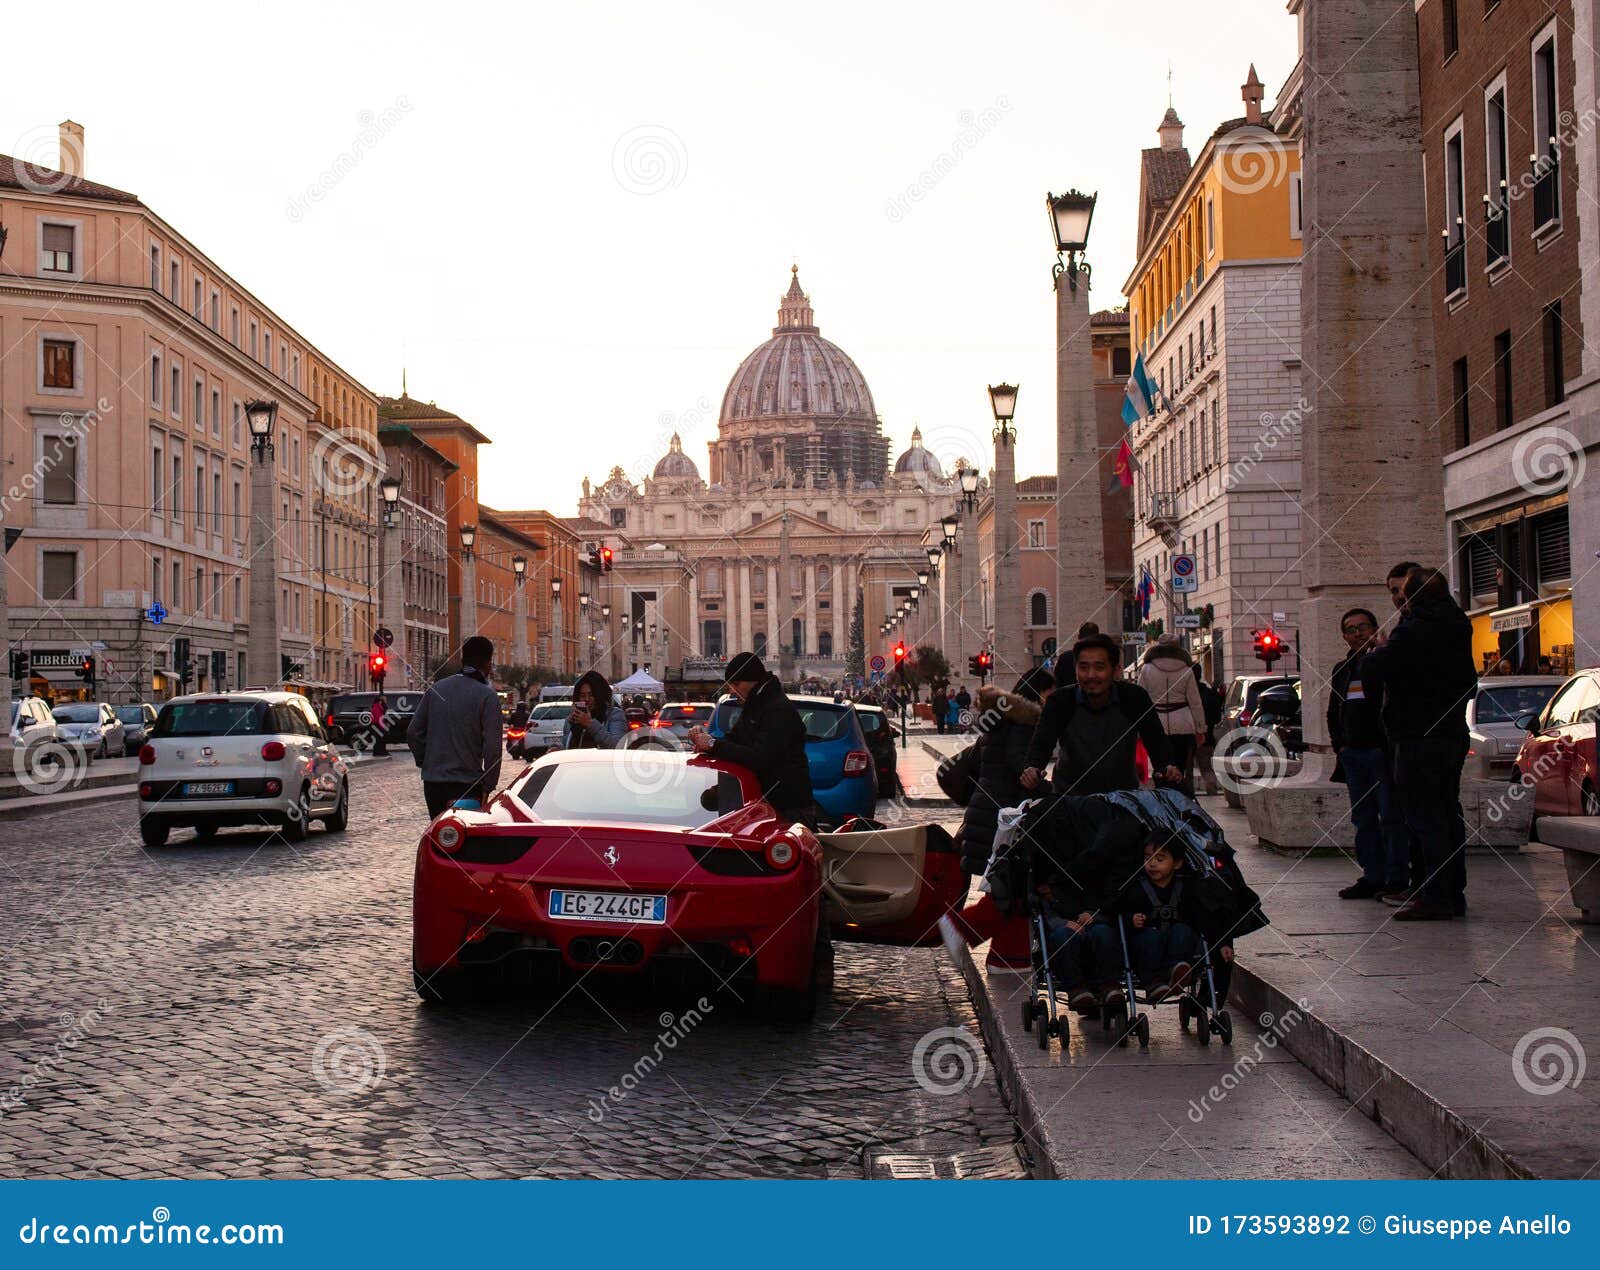 View Of The Ferrari Car Parked Near The St Peter S Square In The Vatican City Rome Editorial Photography Image Of Historic Monument 173593892